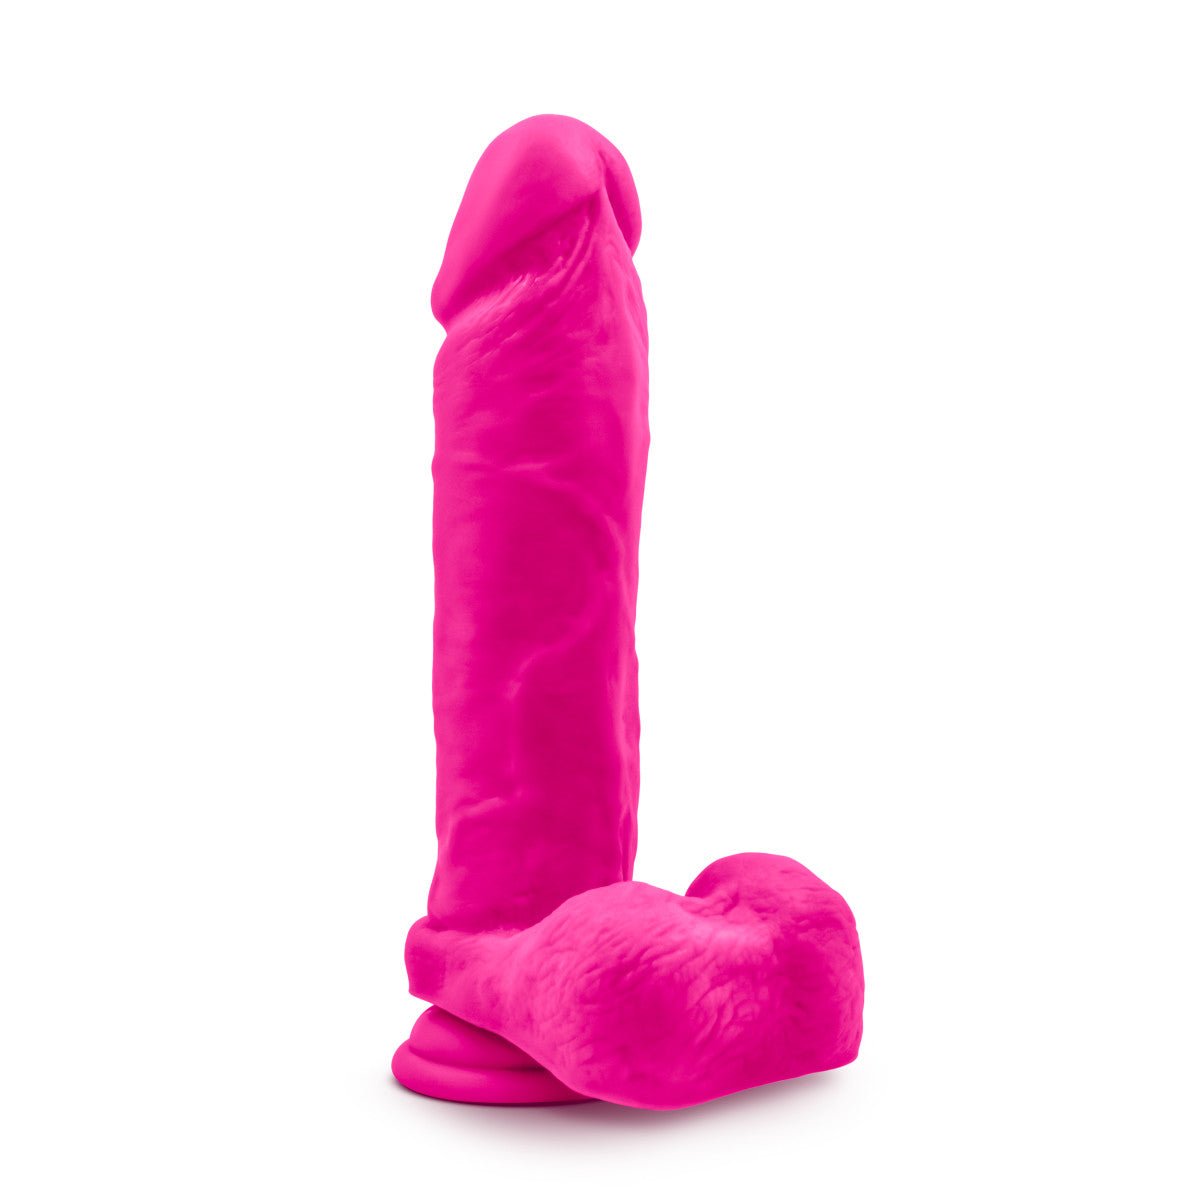 Pink realistic extra large dildo with a rounded head, veins along a straight but flexible shaft, realistic balls, and a suction cup base. Additional images show alternate angles.